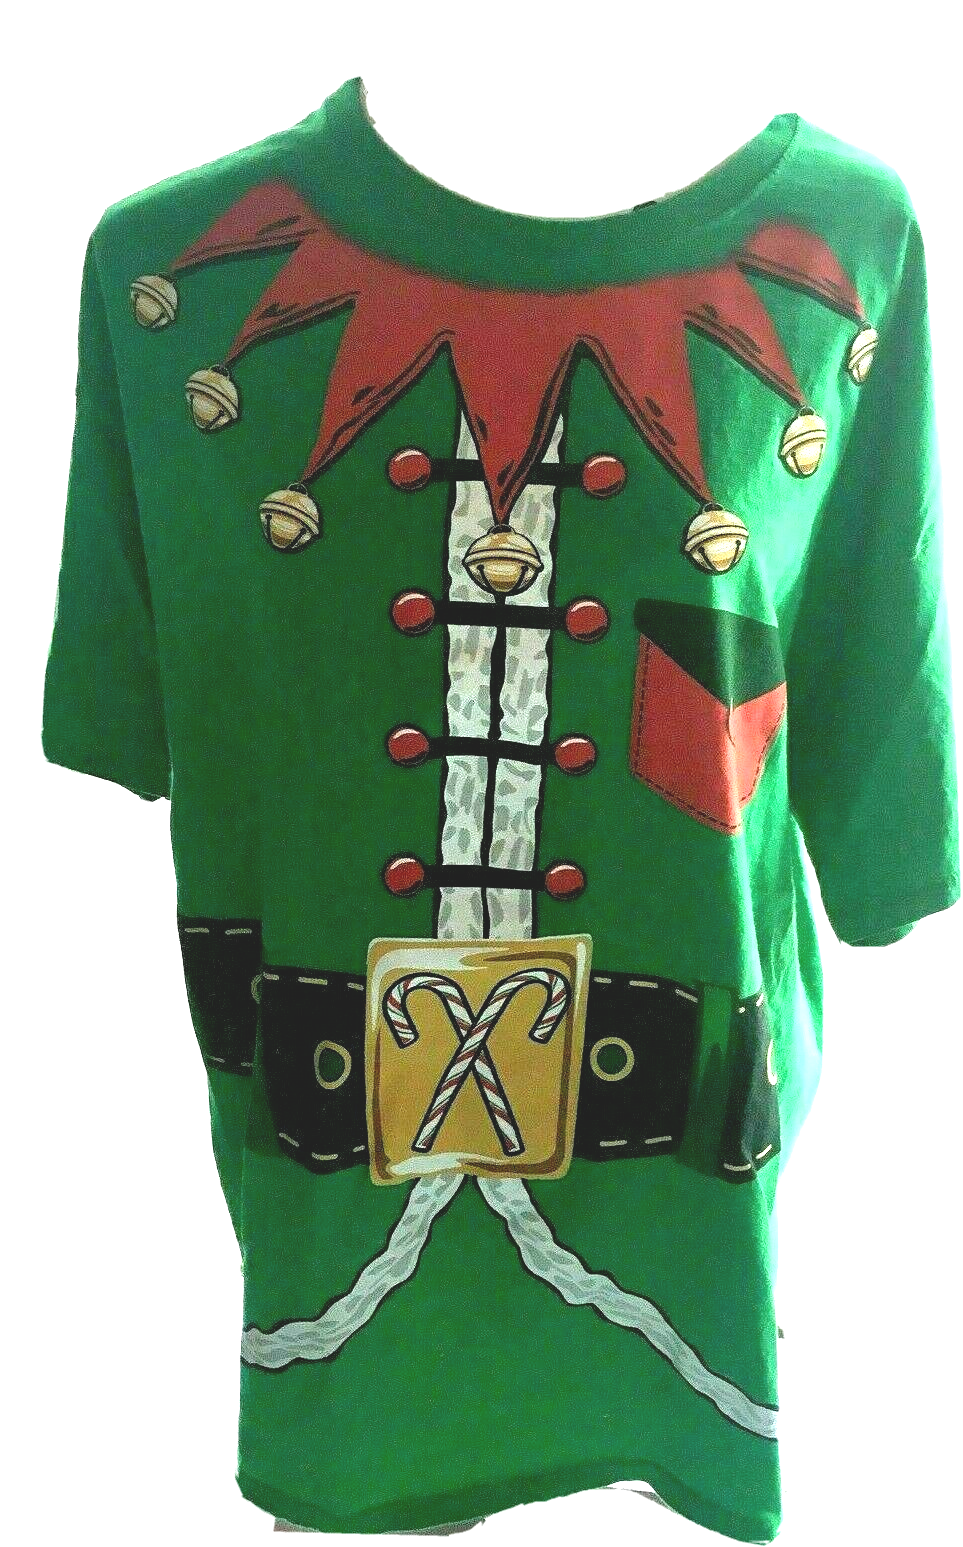 Primary image for Unisex Dec. 25th XL Christmas Elf Shirt 48” Bust 29” Long Top Cute SKU 062-073